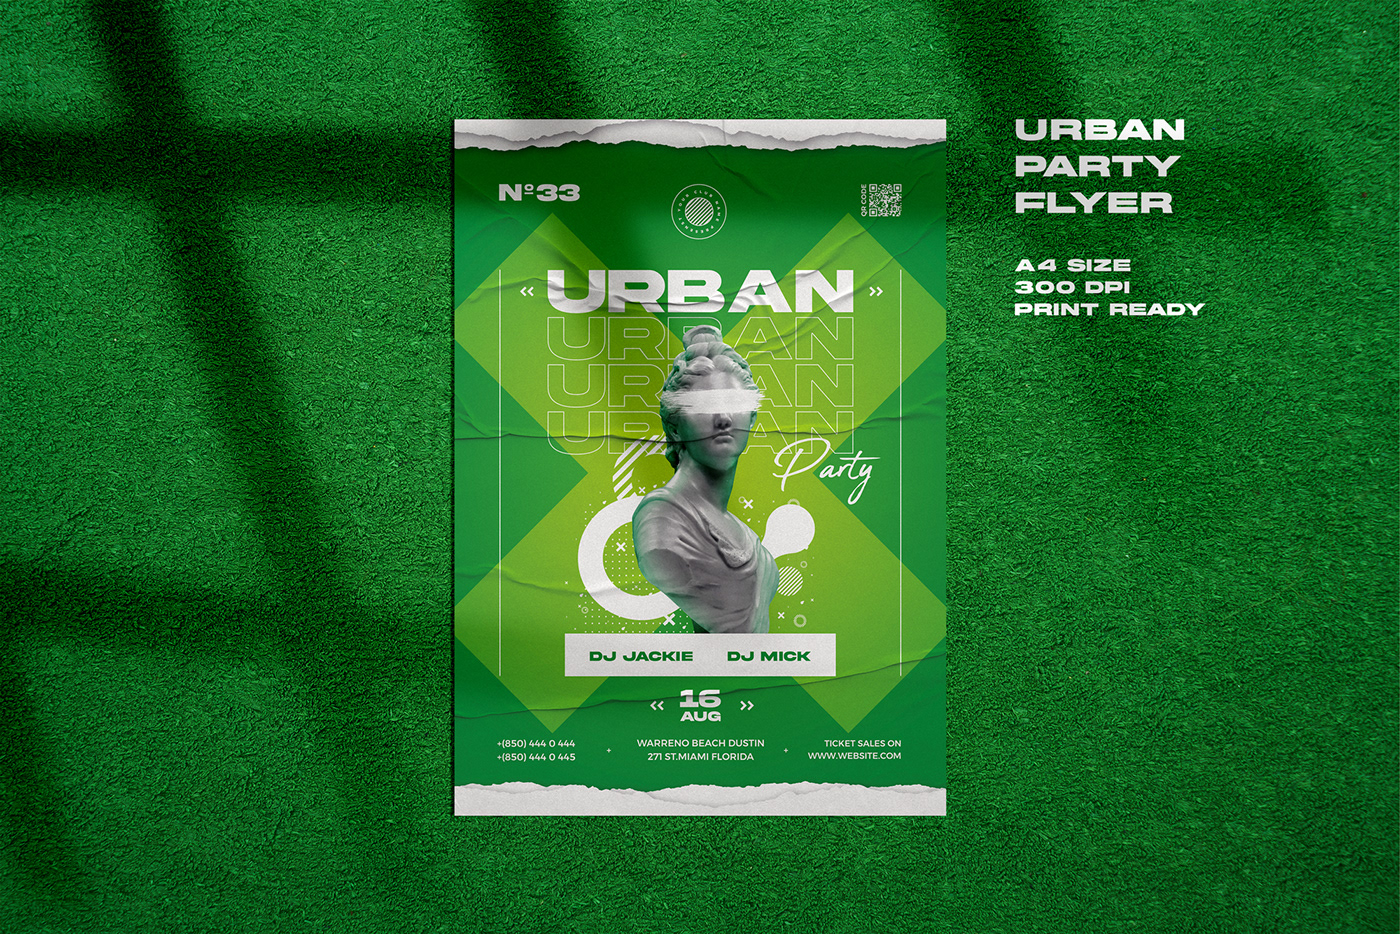 club concert Event festival flyer music party Urban urban party flyer template